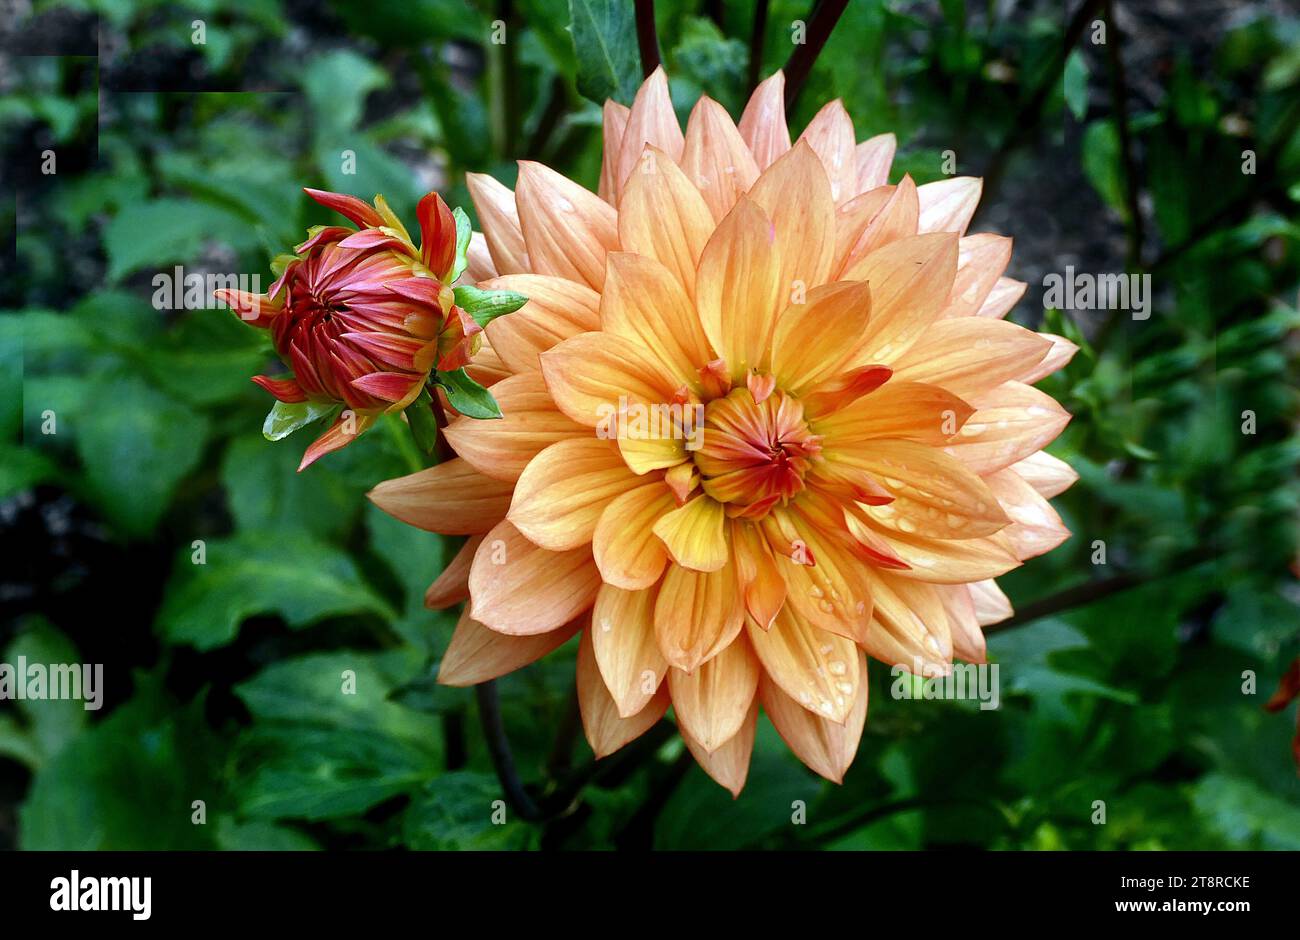 Orange Ruby. Dahlia, Dahlia plants are amazing, another example of horticultural magic. The dinner plate types can grow a full metre high in just a few months while producing blooms almost 30 cm across Stock Photo